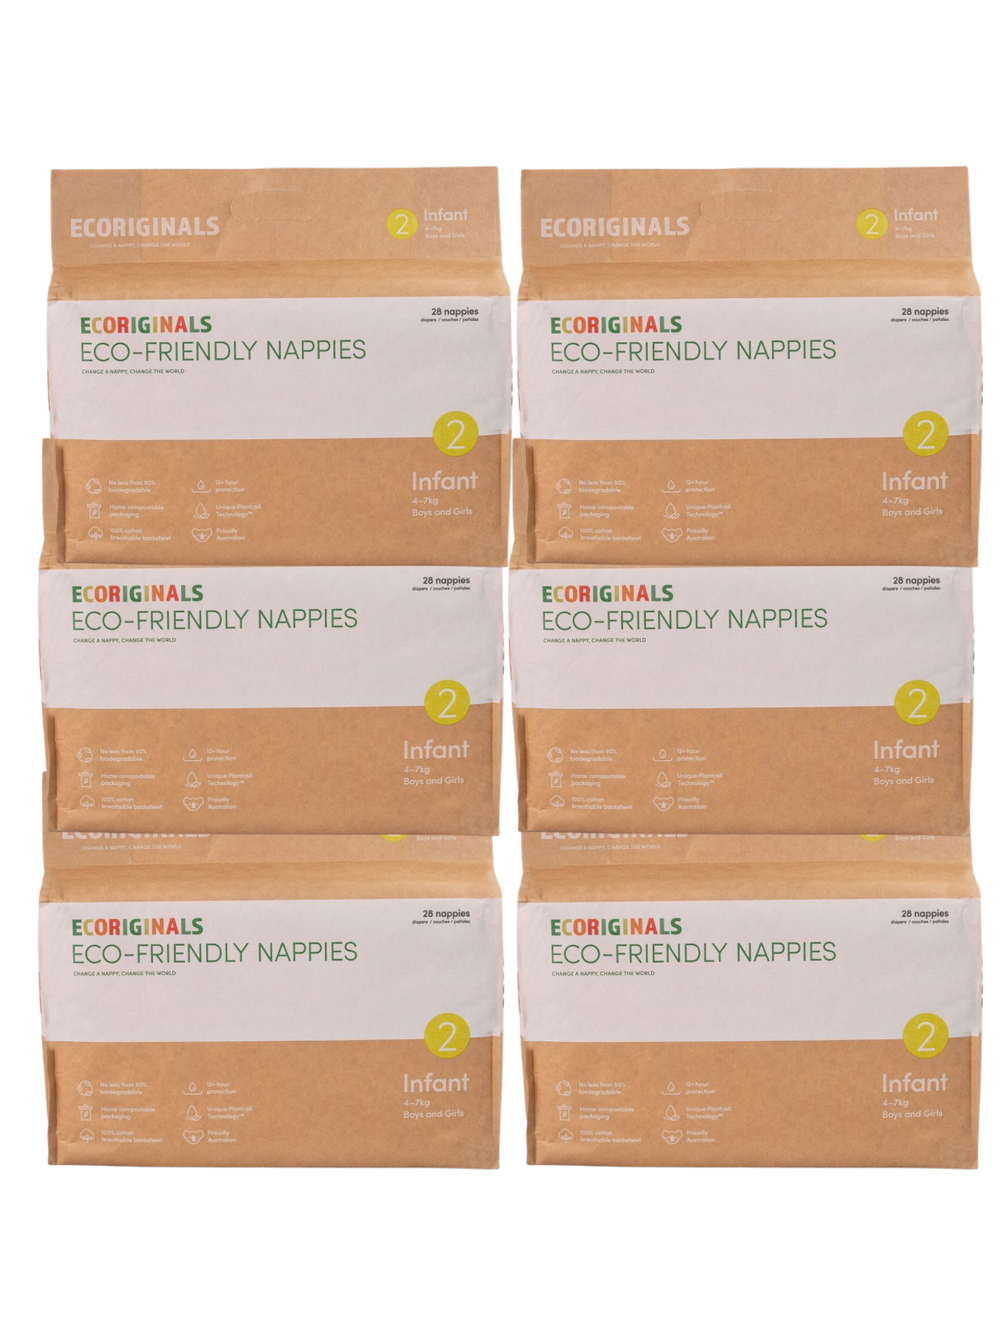 Nappies Infant (Carton of 6 bags)